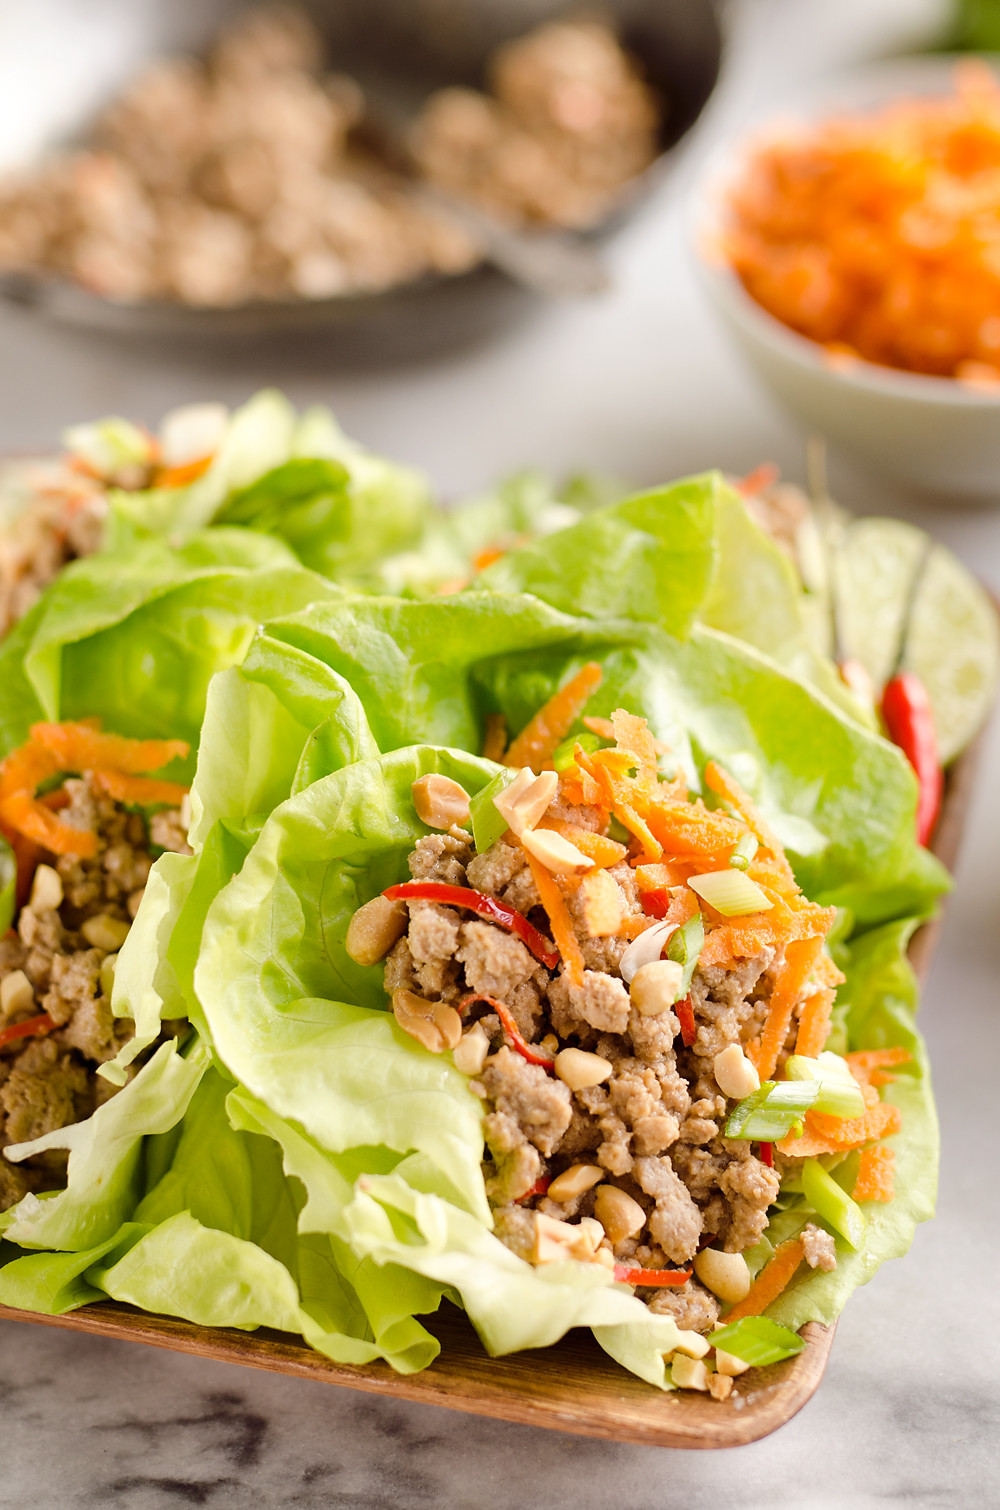 Healthy Dinner Ideas With Ground Turkey
 Healthy Weekly Meal Plan 51 Yummy Healthy Easy